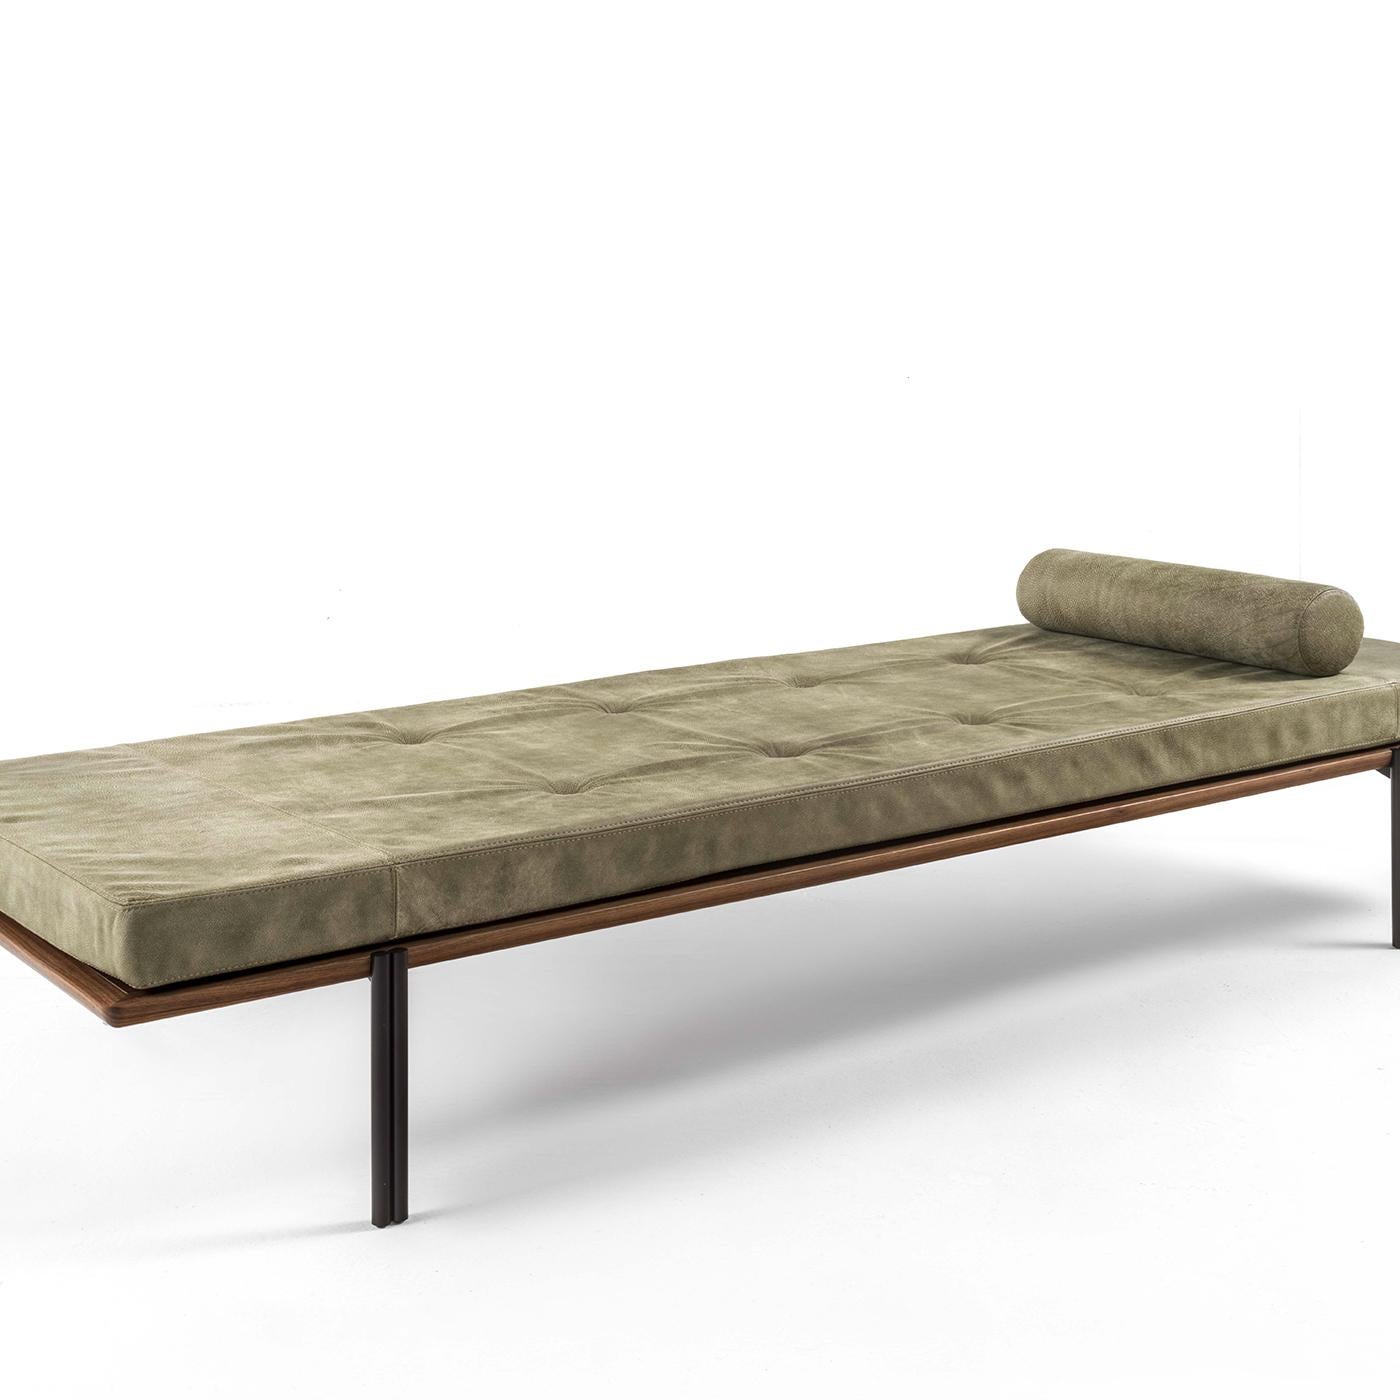 Simple in its design, the Jean daybed is functional, comfortable and extremely elegant. With the leather seat on top of a wooden base, it is a union of form and function, making this a dynamic and sophisticated addition to various styles of decor.